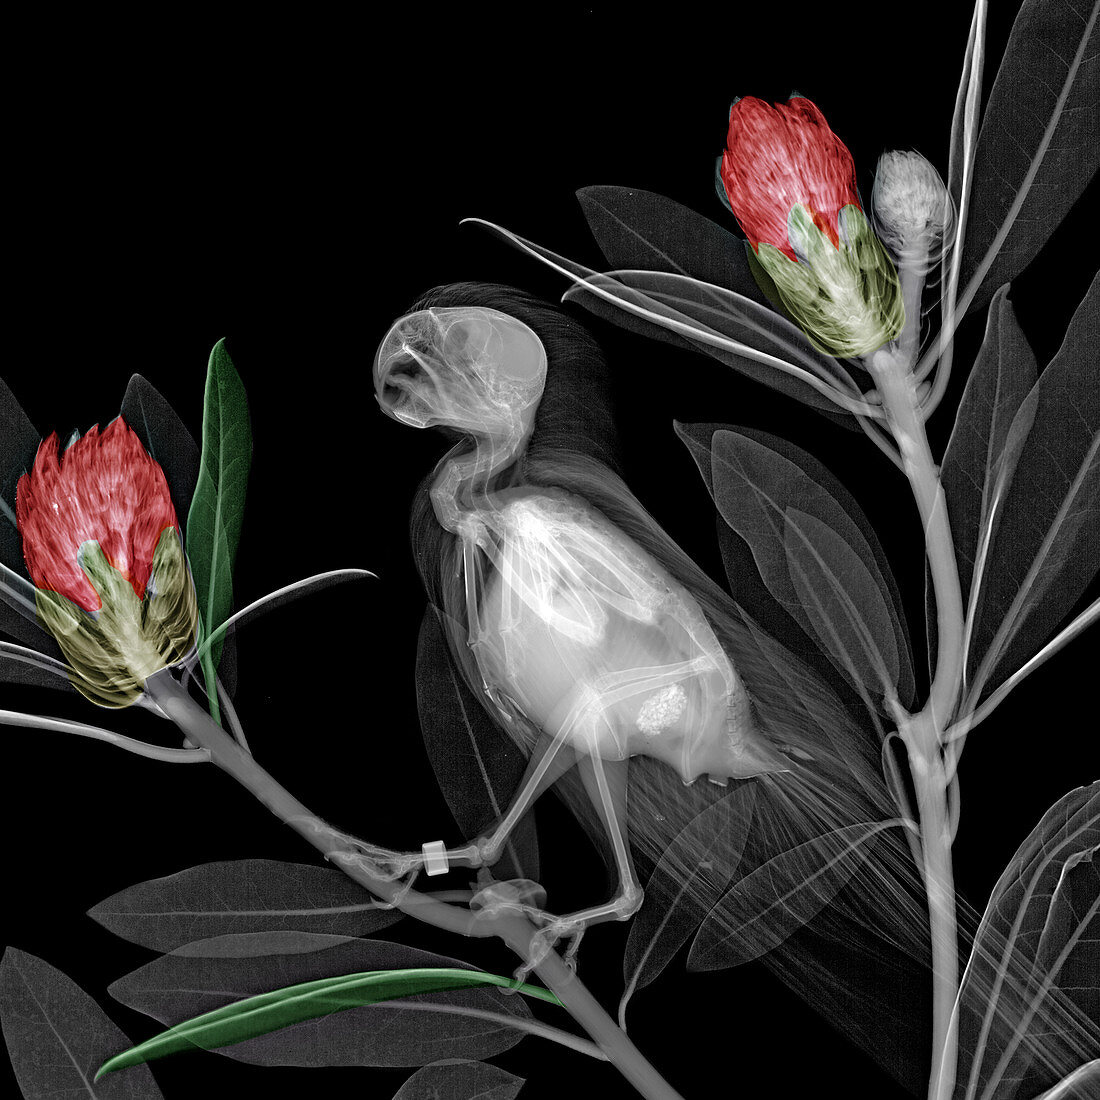 Parakeet and rhododendrons, X-ray